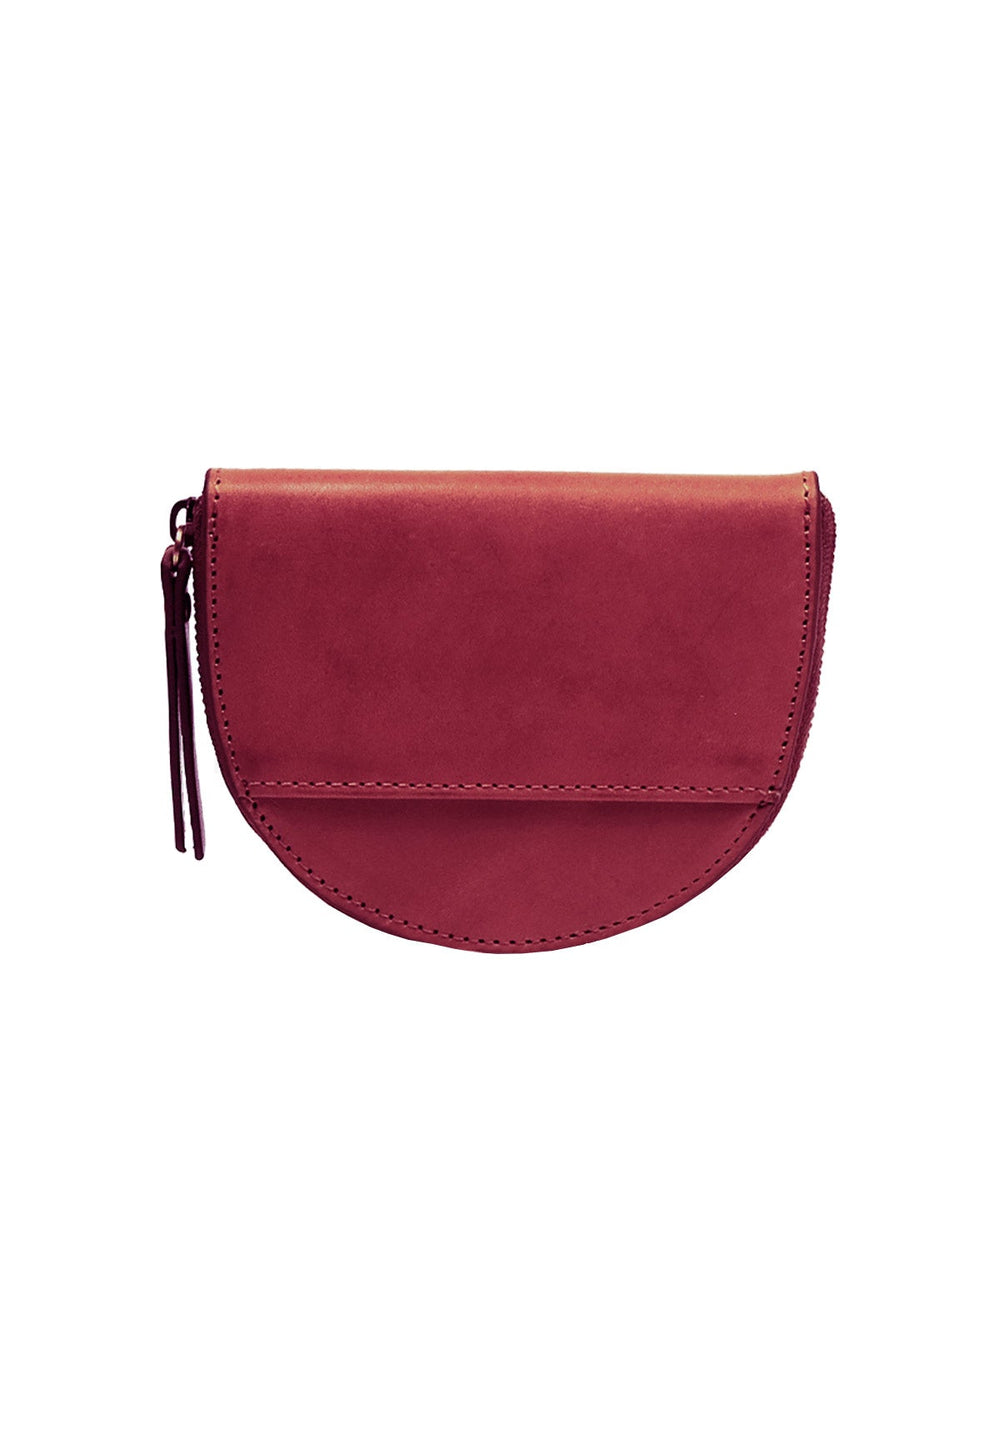 LAURA'S COIN PURSE RUBY LEATHER - Moeon